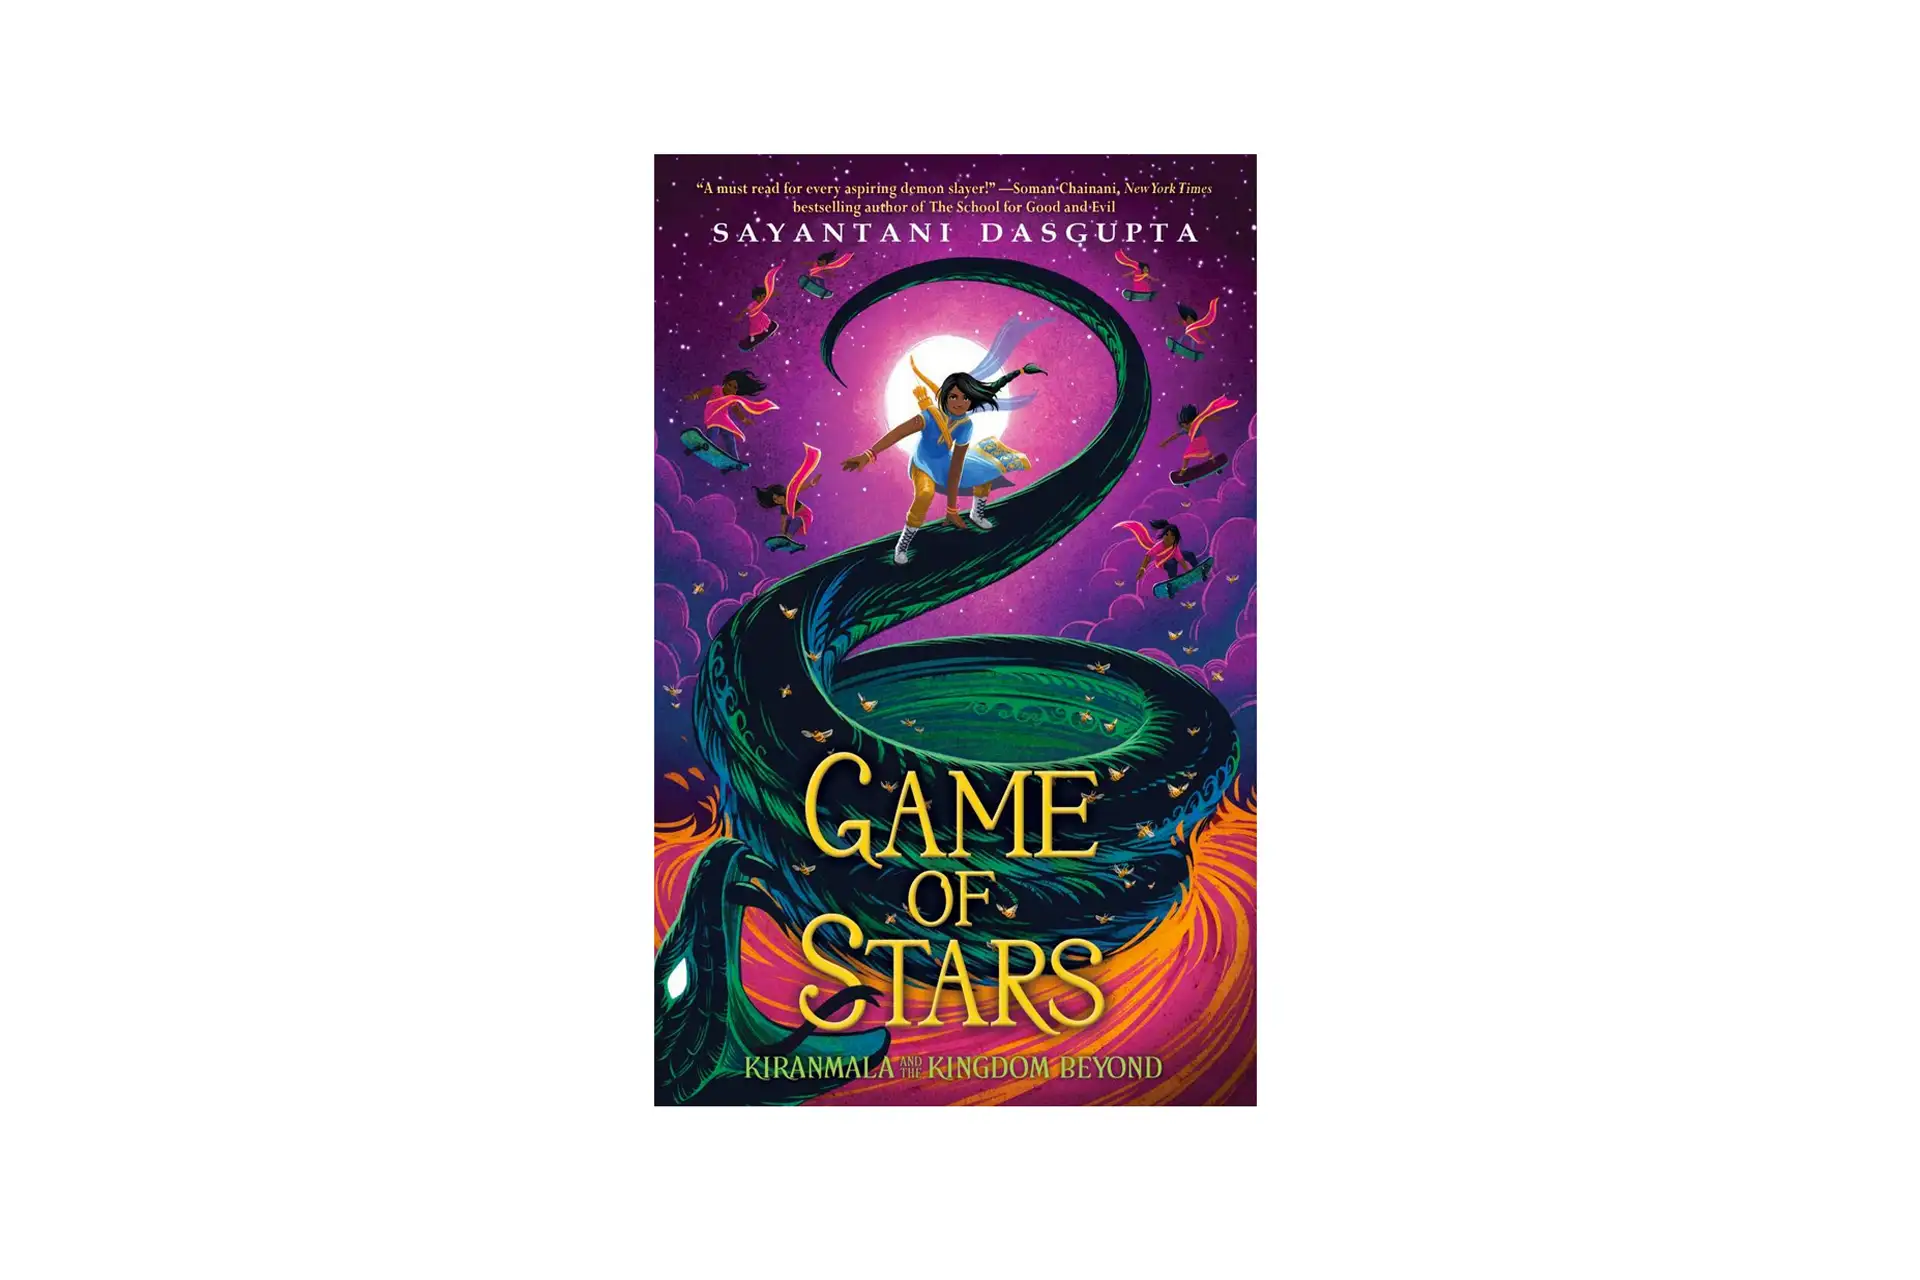 Game of Stars Book; Courtesy of Amazon